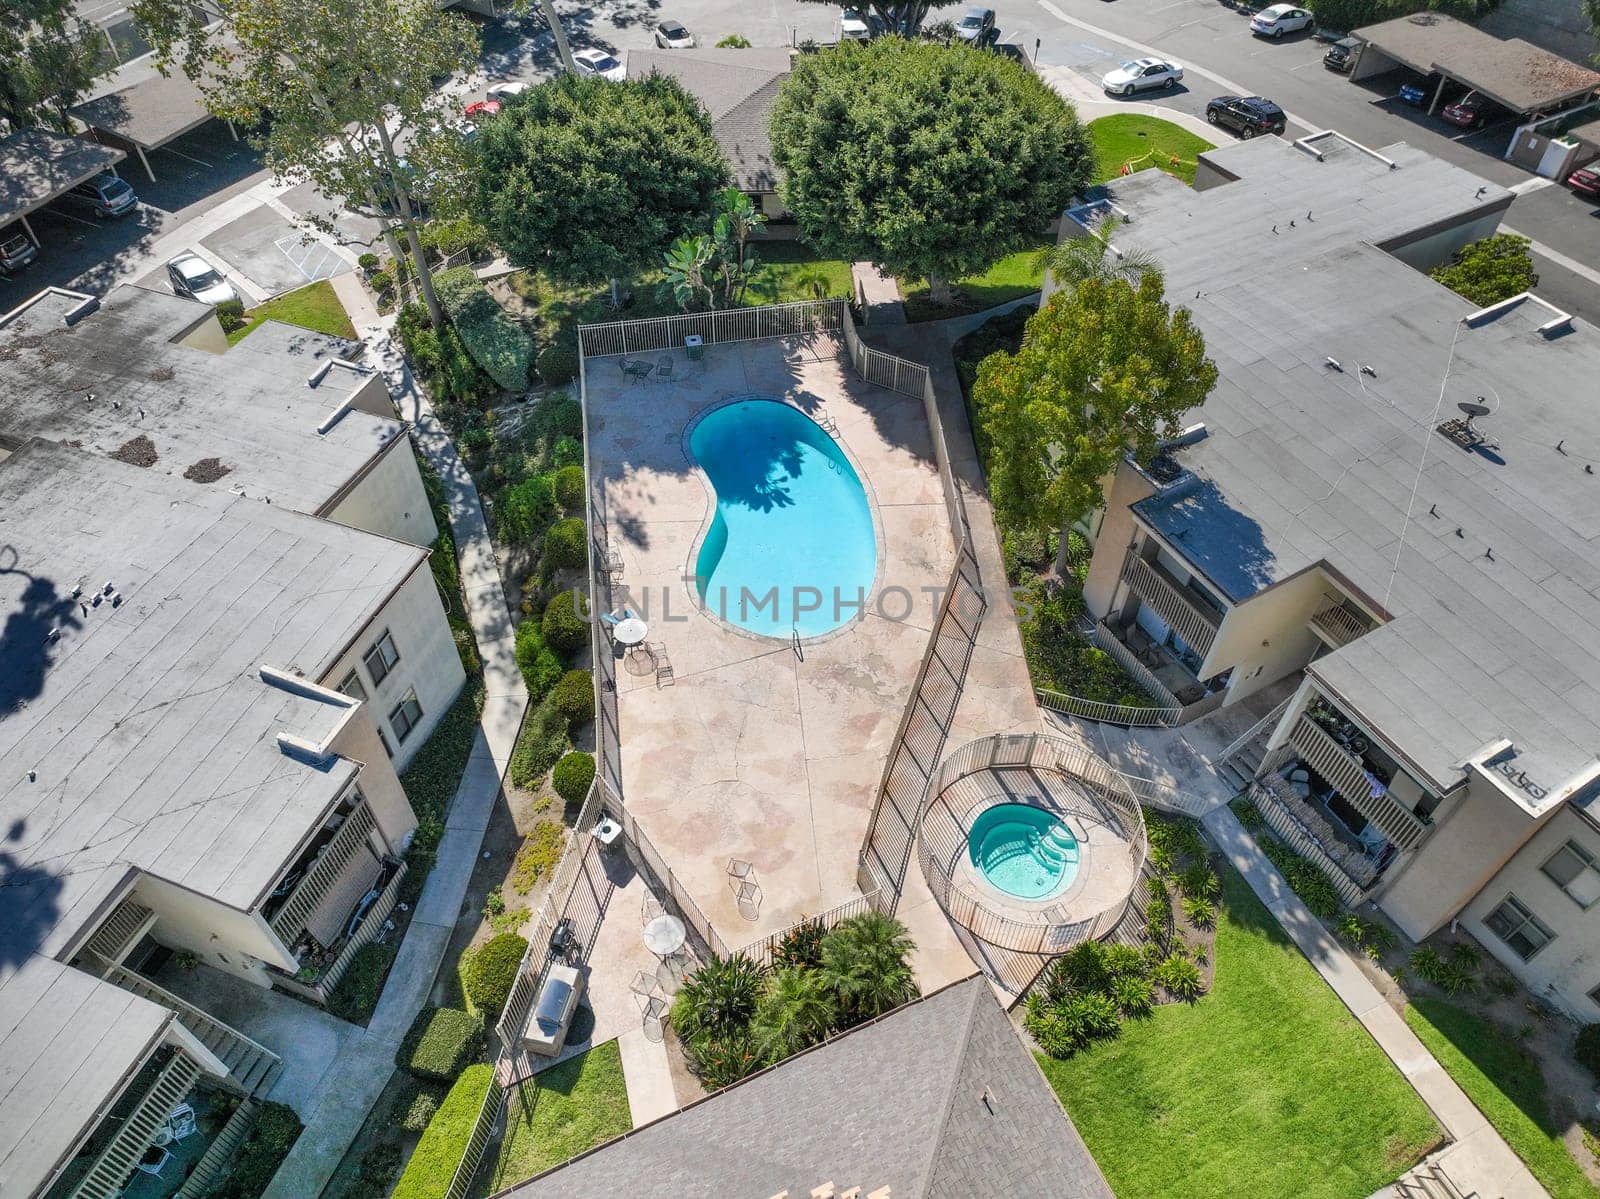 Gardens with pool and Jacuzzi in a the typical apartment complex building in San Diego, California, USA. January 1st, 2024